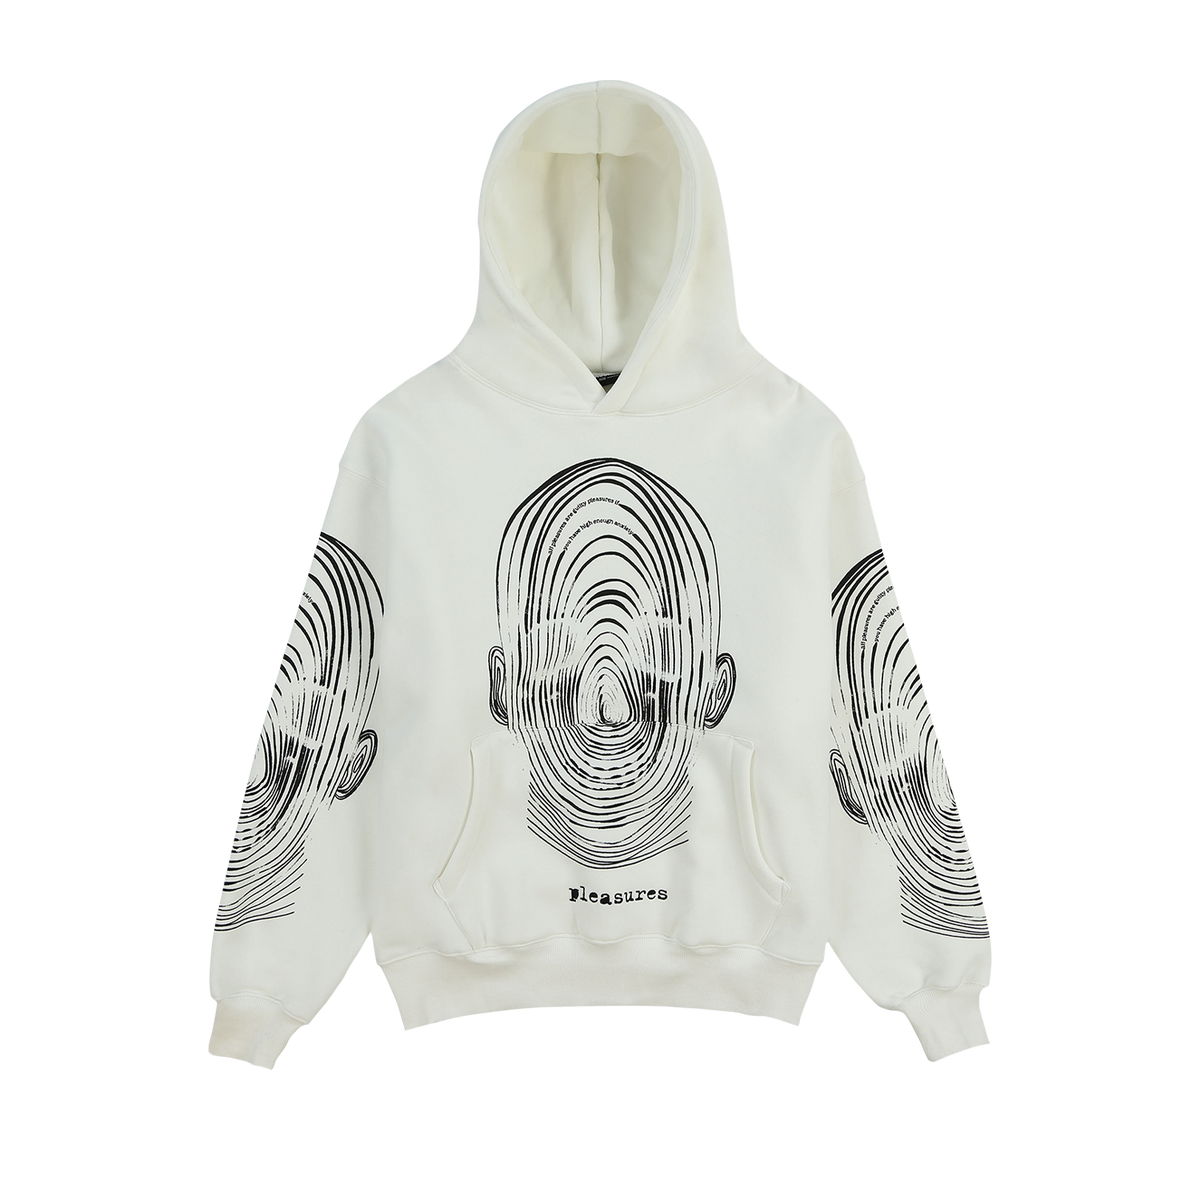 Guilty Hoodie - Off White